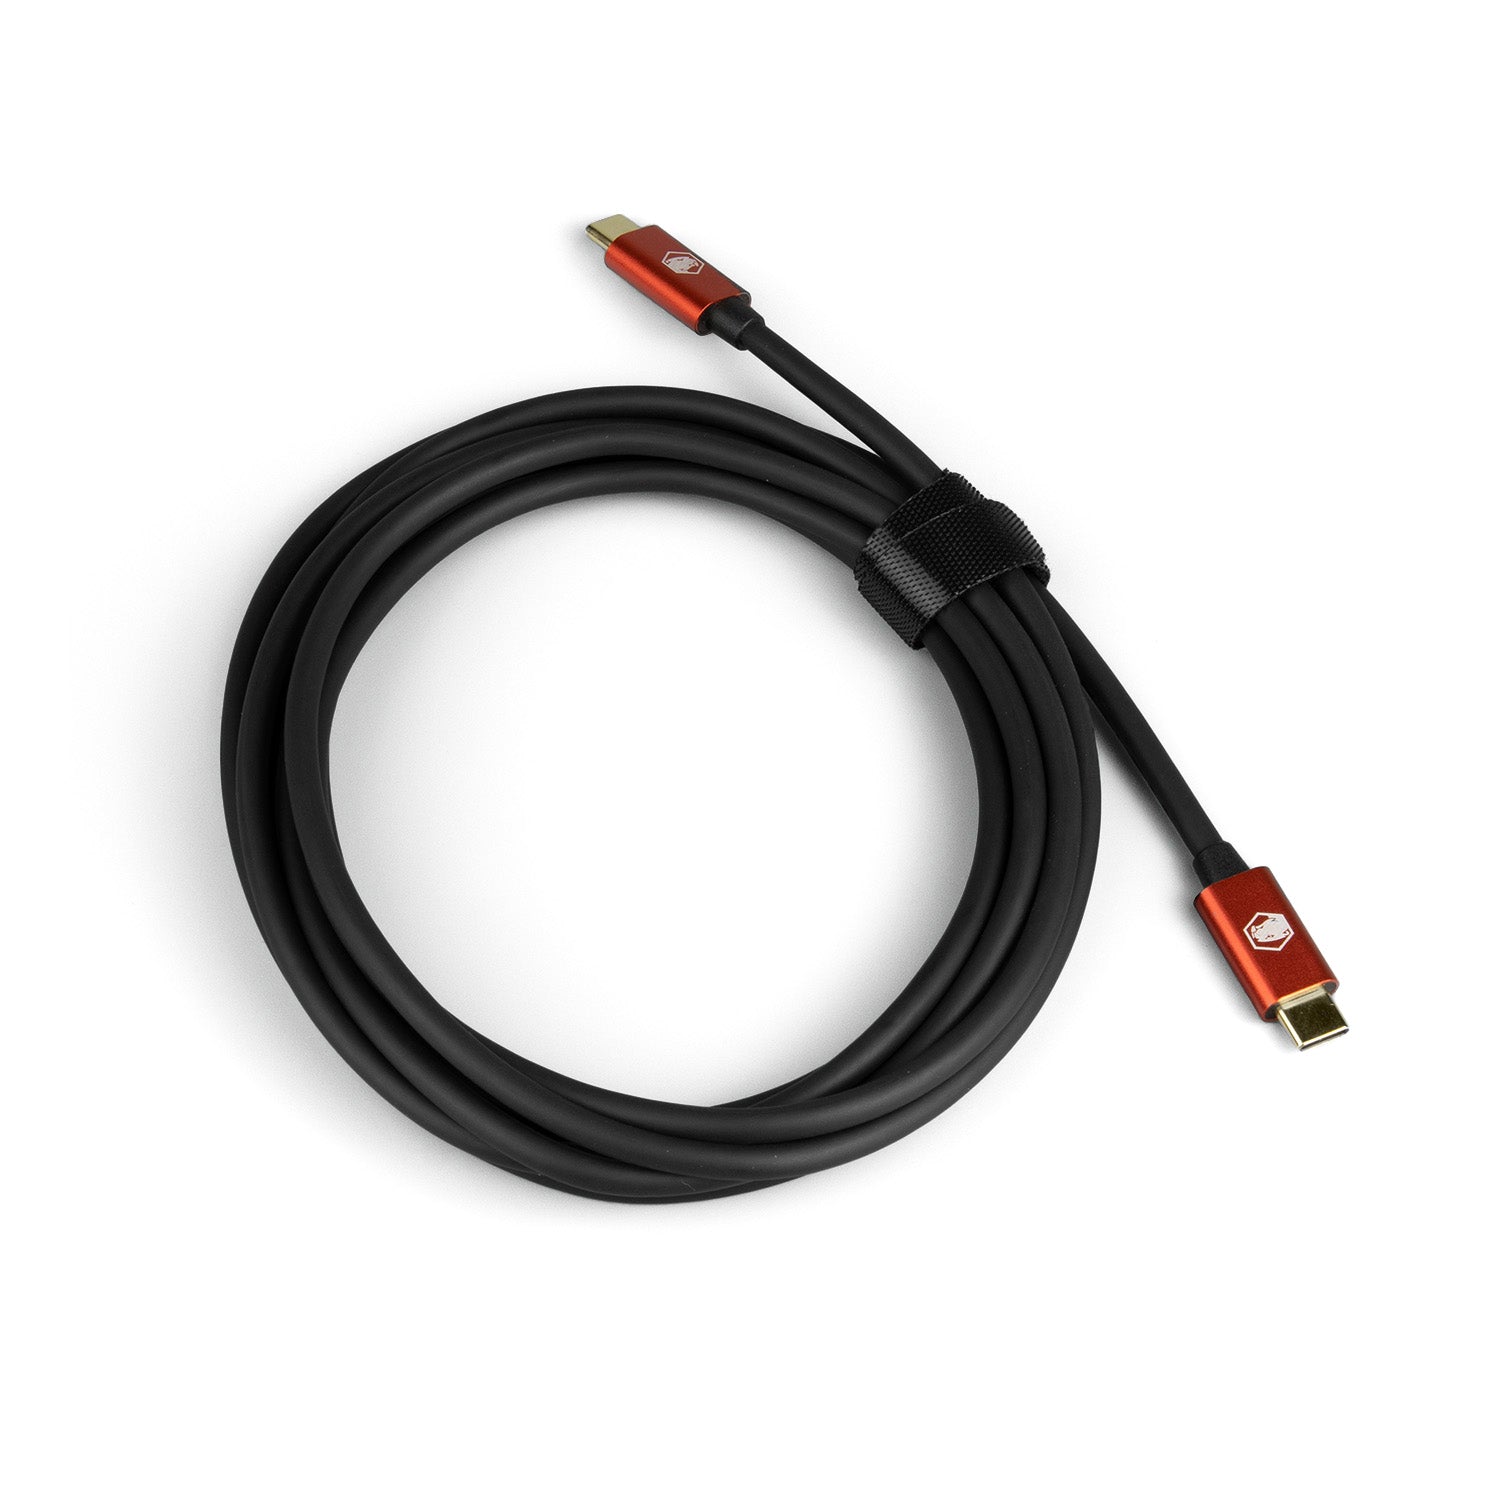 USB-C to USB-C 3.1 Cable - 10ft